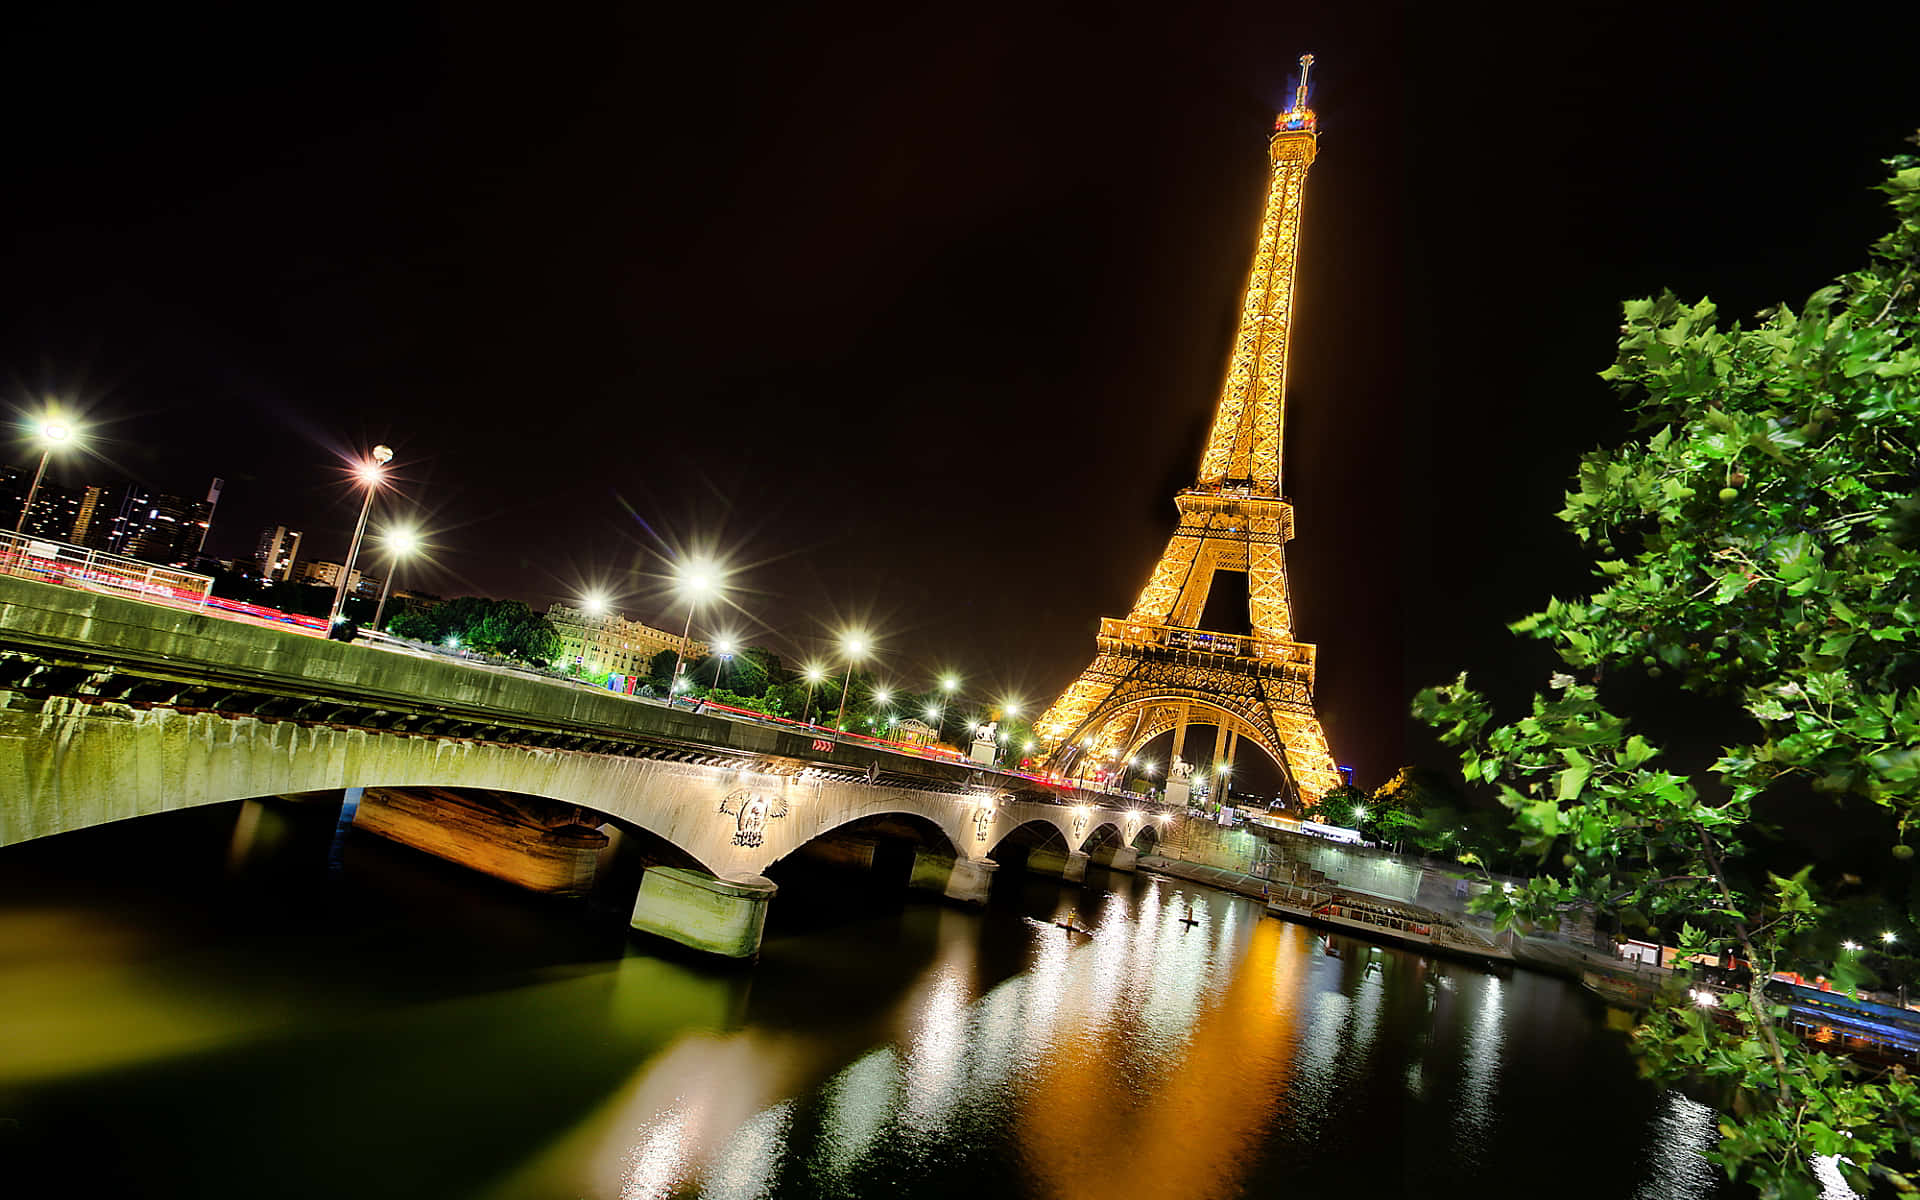 "The Magical Eiffel Tower at Night"